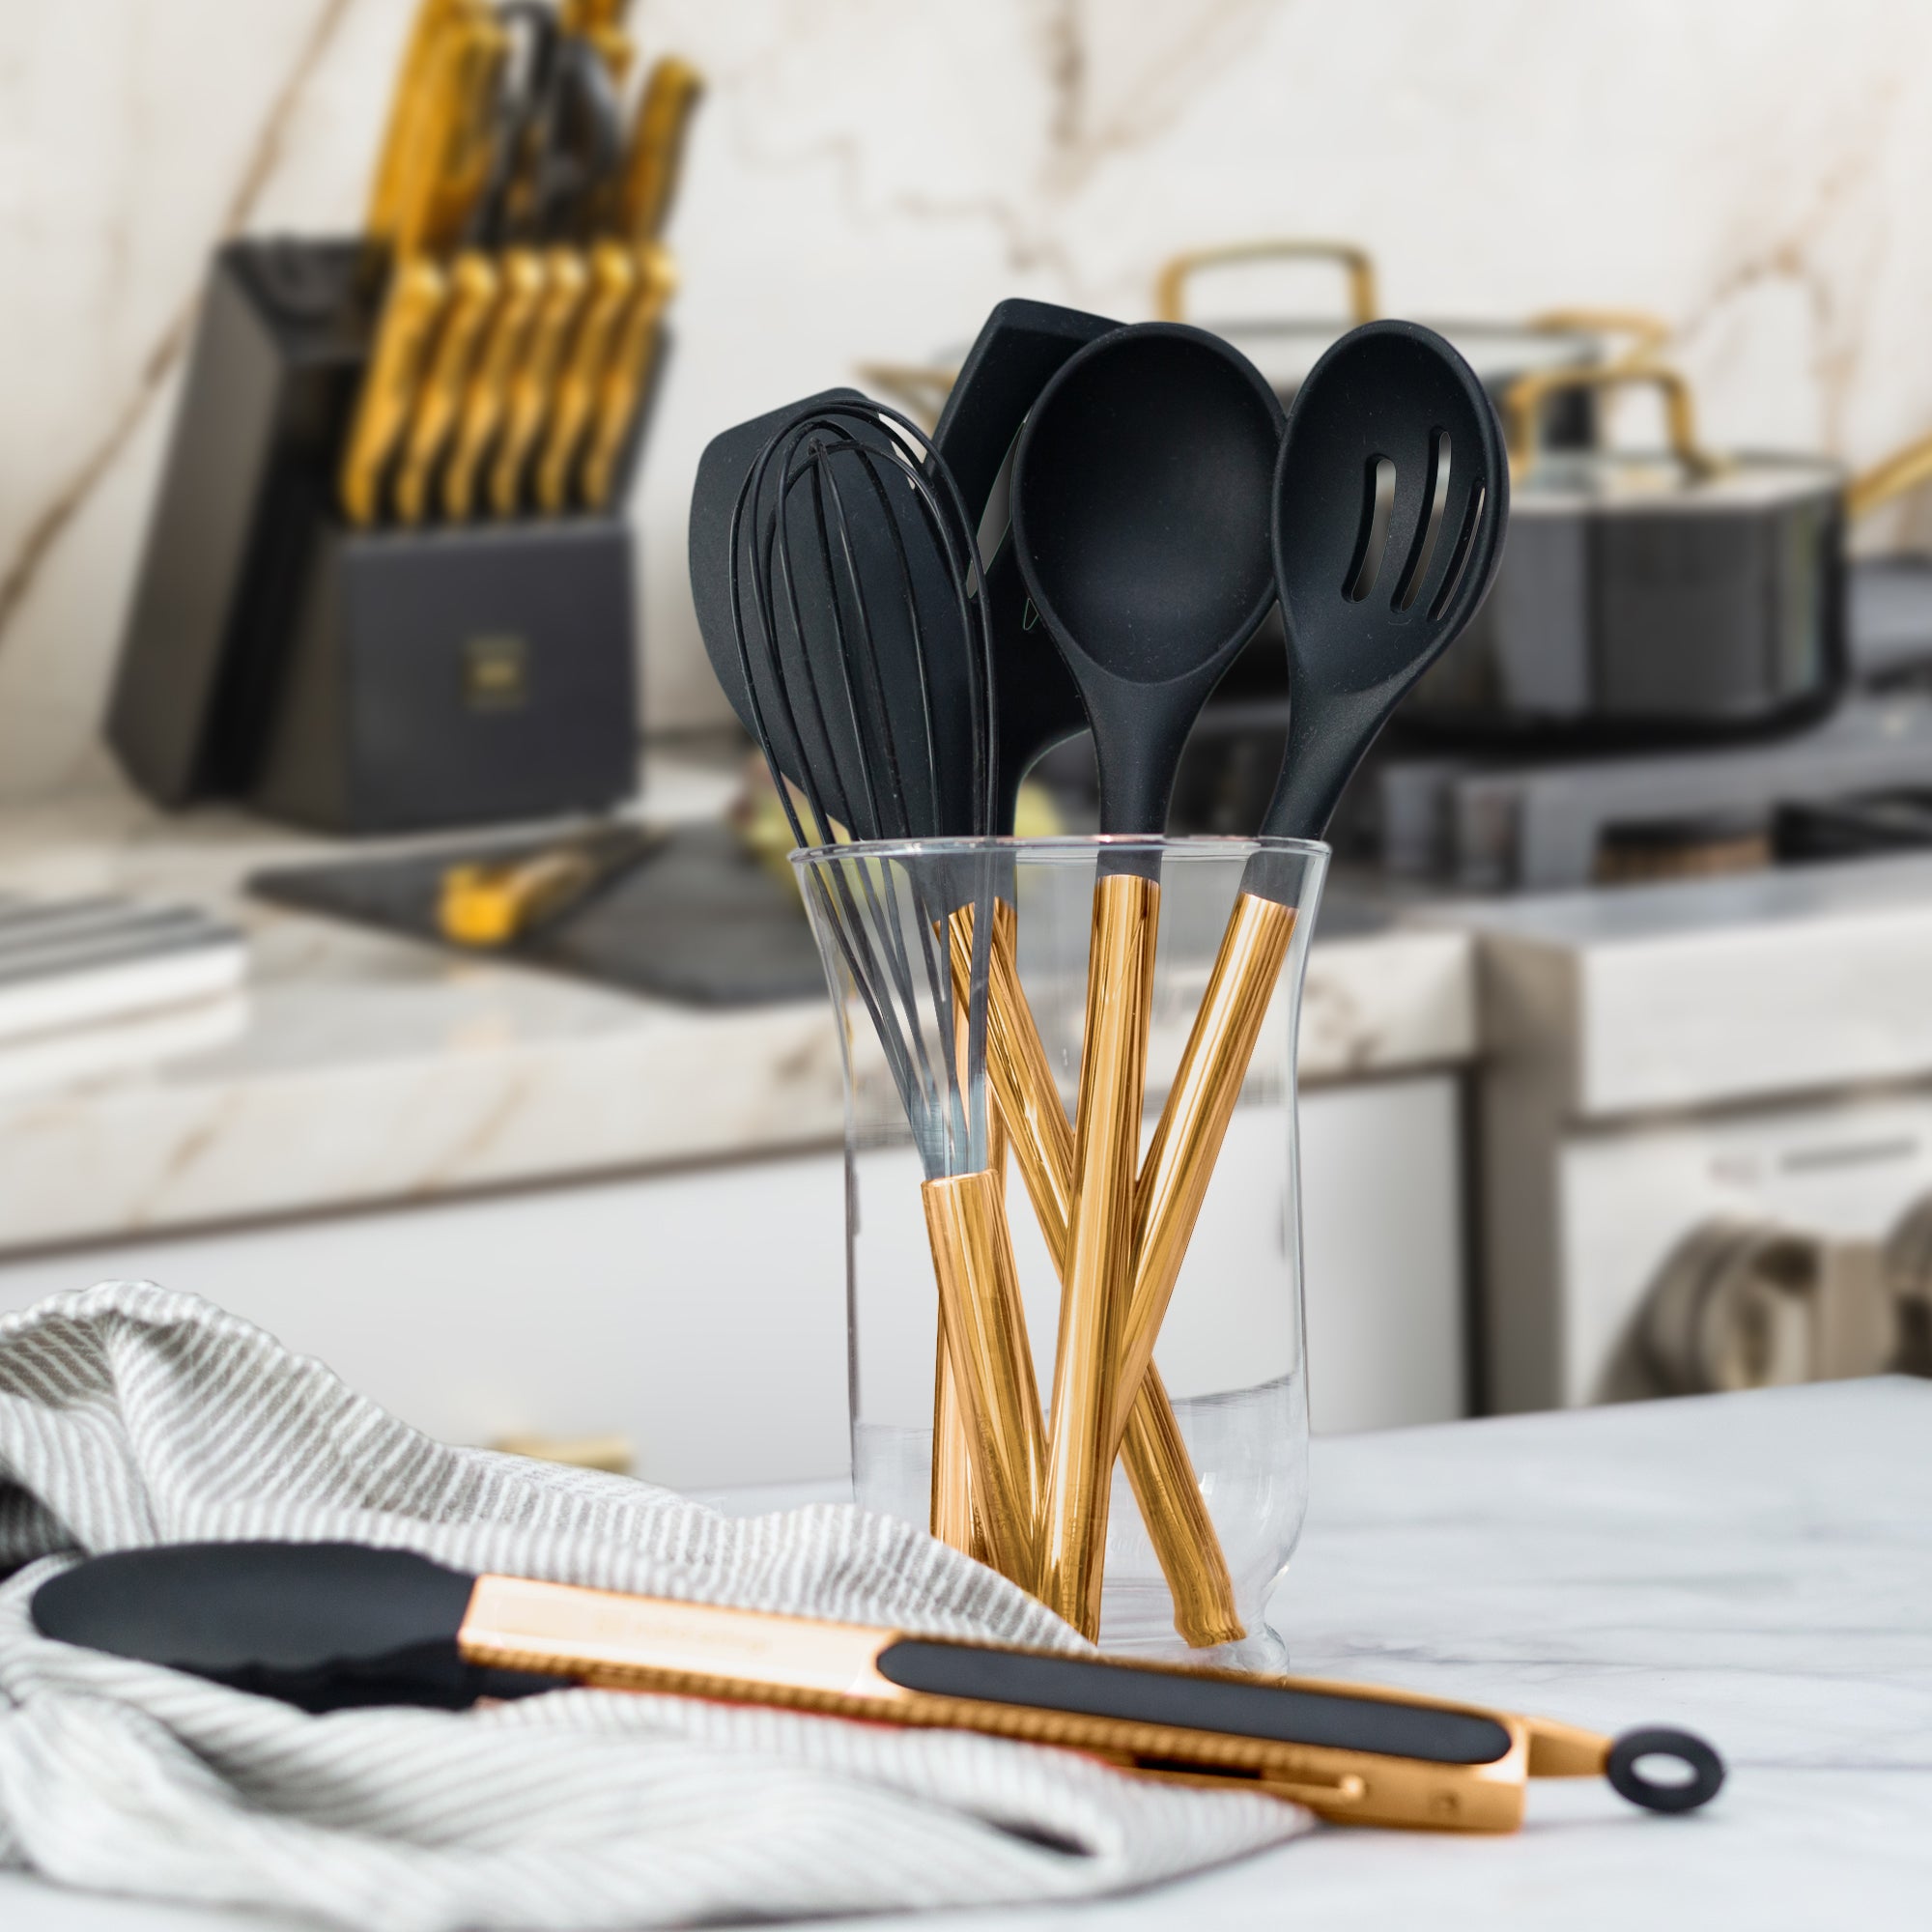 Black and Gold Kitchen Utensils Set - Styled Settings